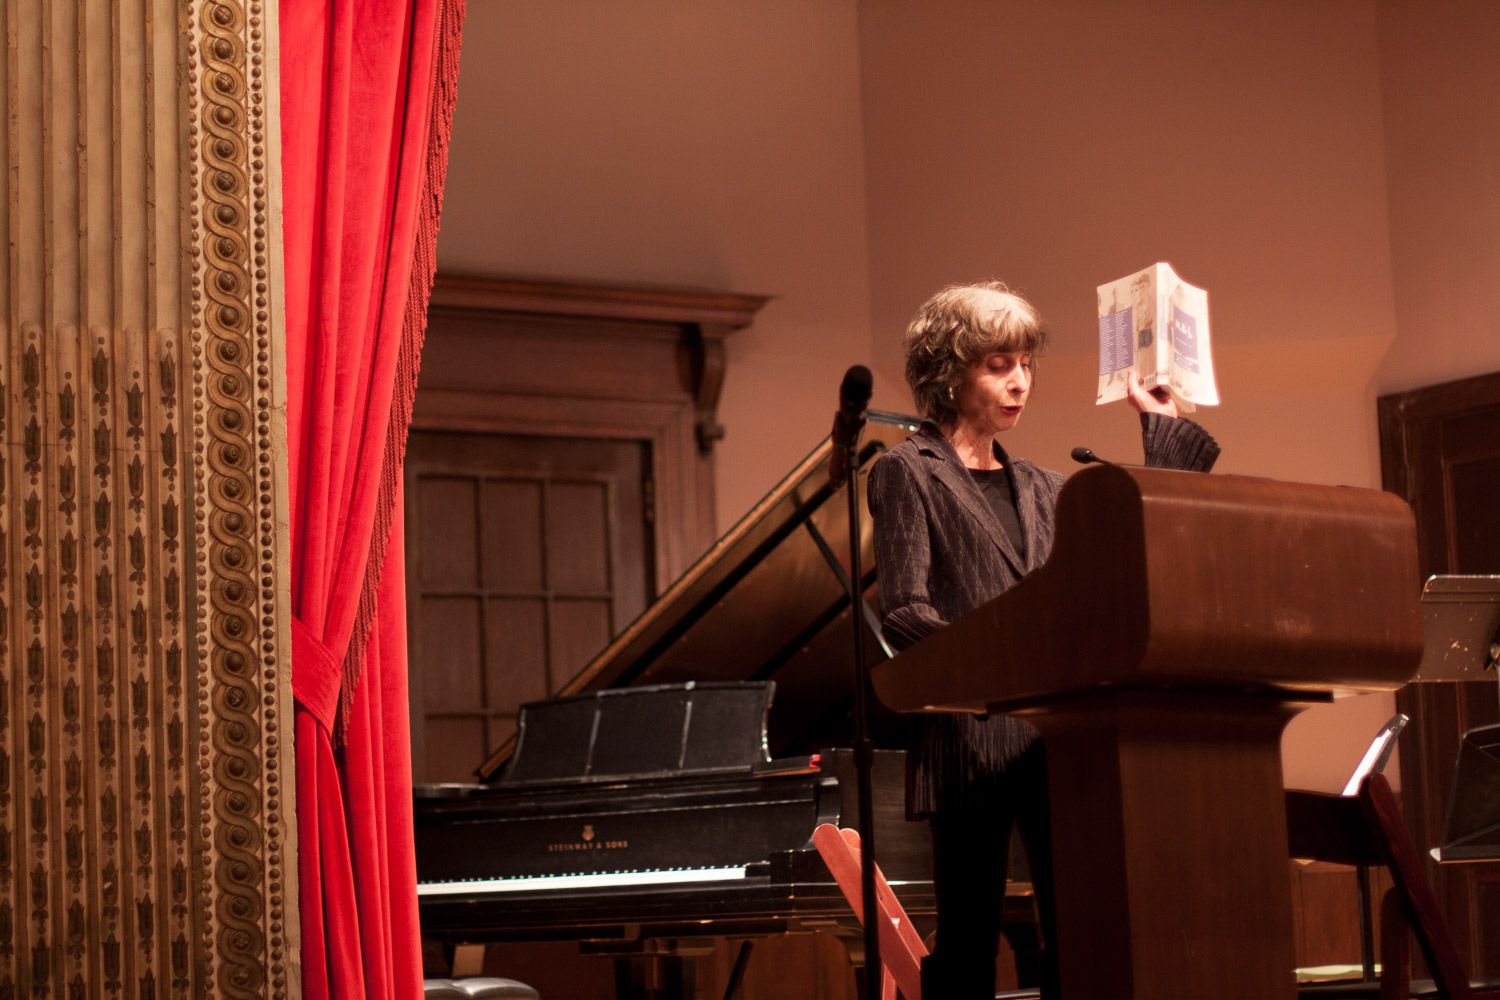  Deborah Eisenberg reads from "A Story about How Stories Come to Be Written," by Dubravka Ugrešić. 